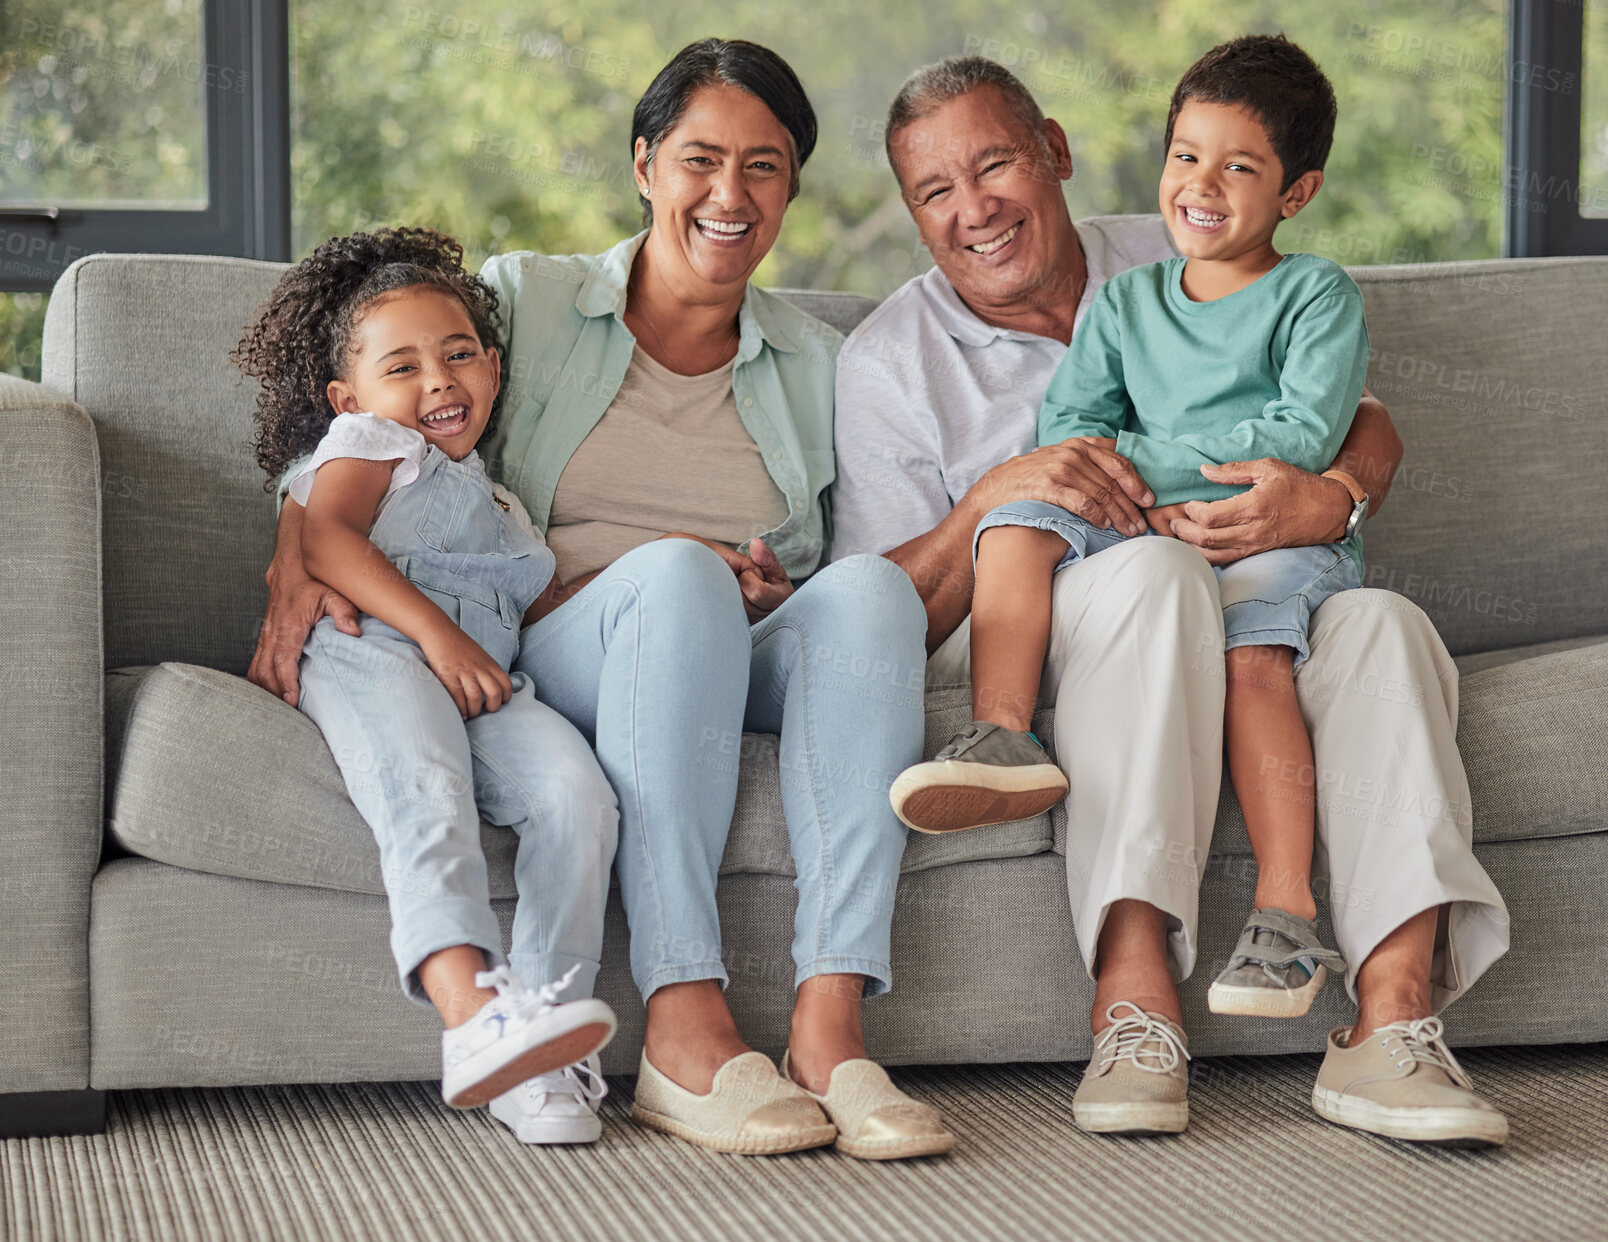 Buy stock photo Grandparents, children and sofa happy in home living room on vacation or holiday together. Kids, grandma and grandpa in retirement smile on couch in lounge with love for family portrait in house